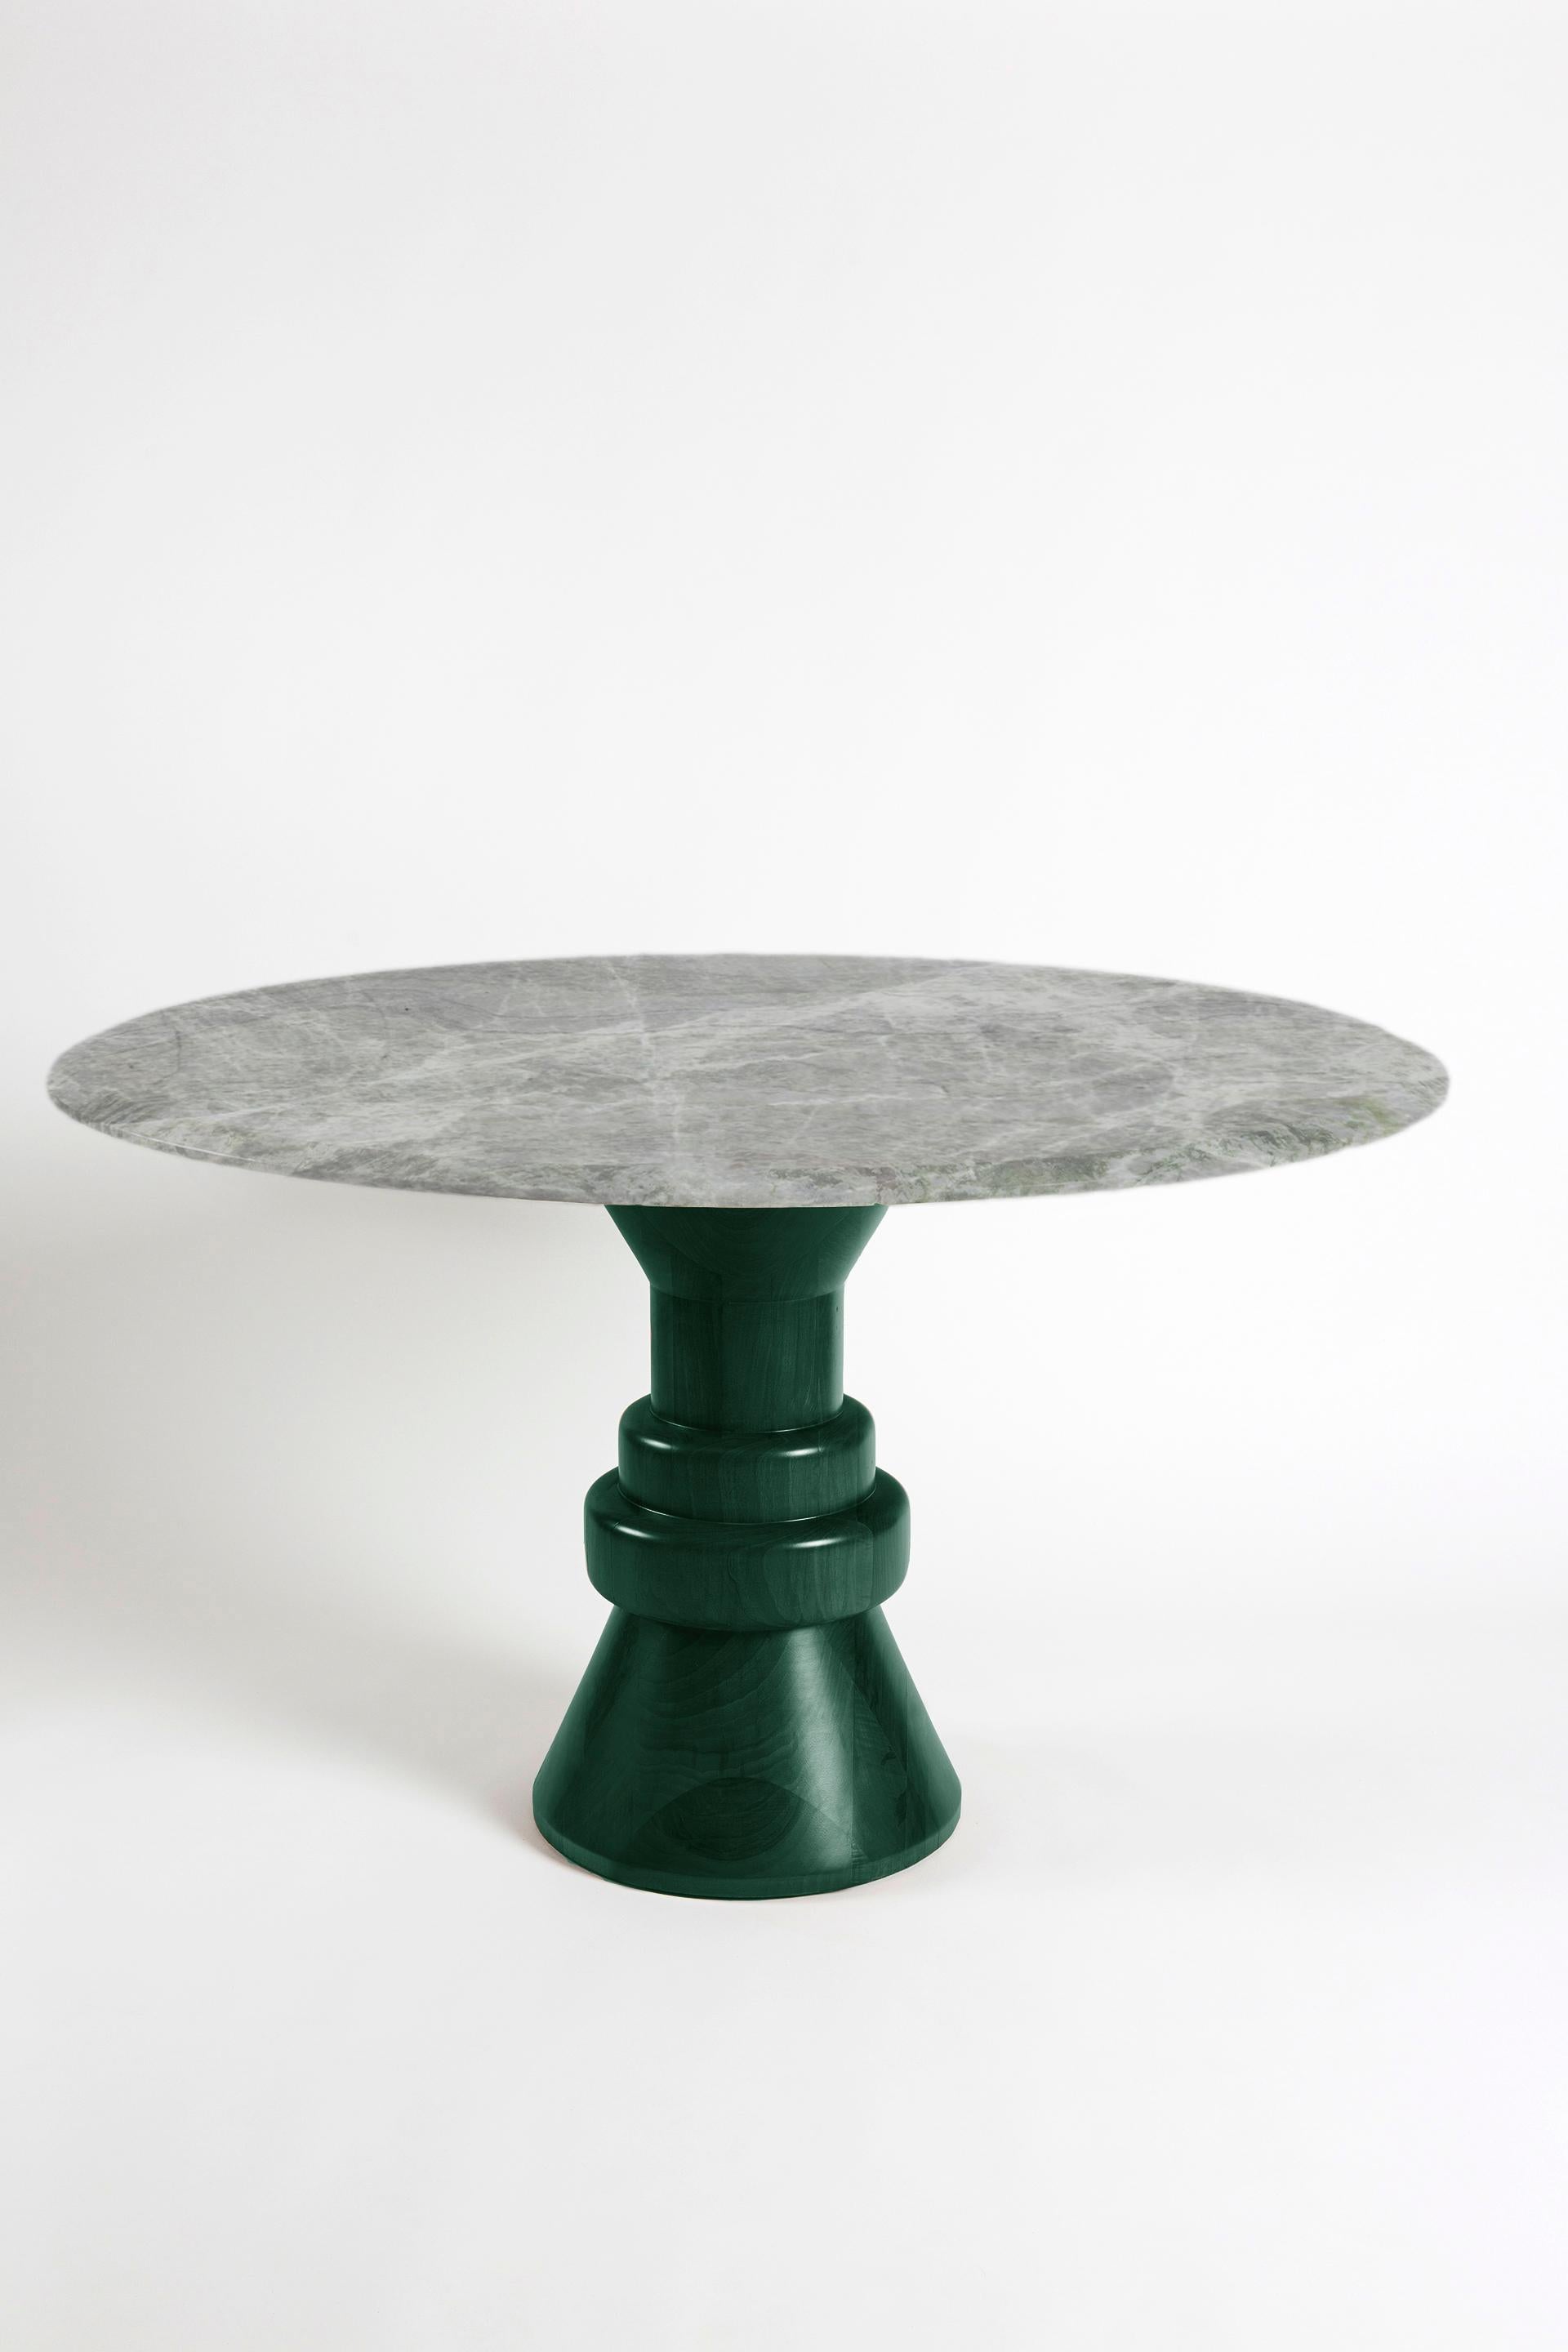 21st Century Green Marble Round Dining Table with Sculptural Wooden Base For Sale 3